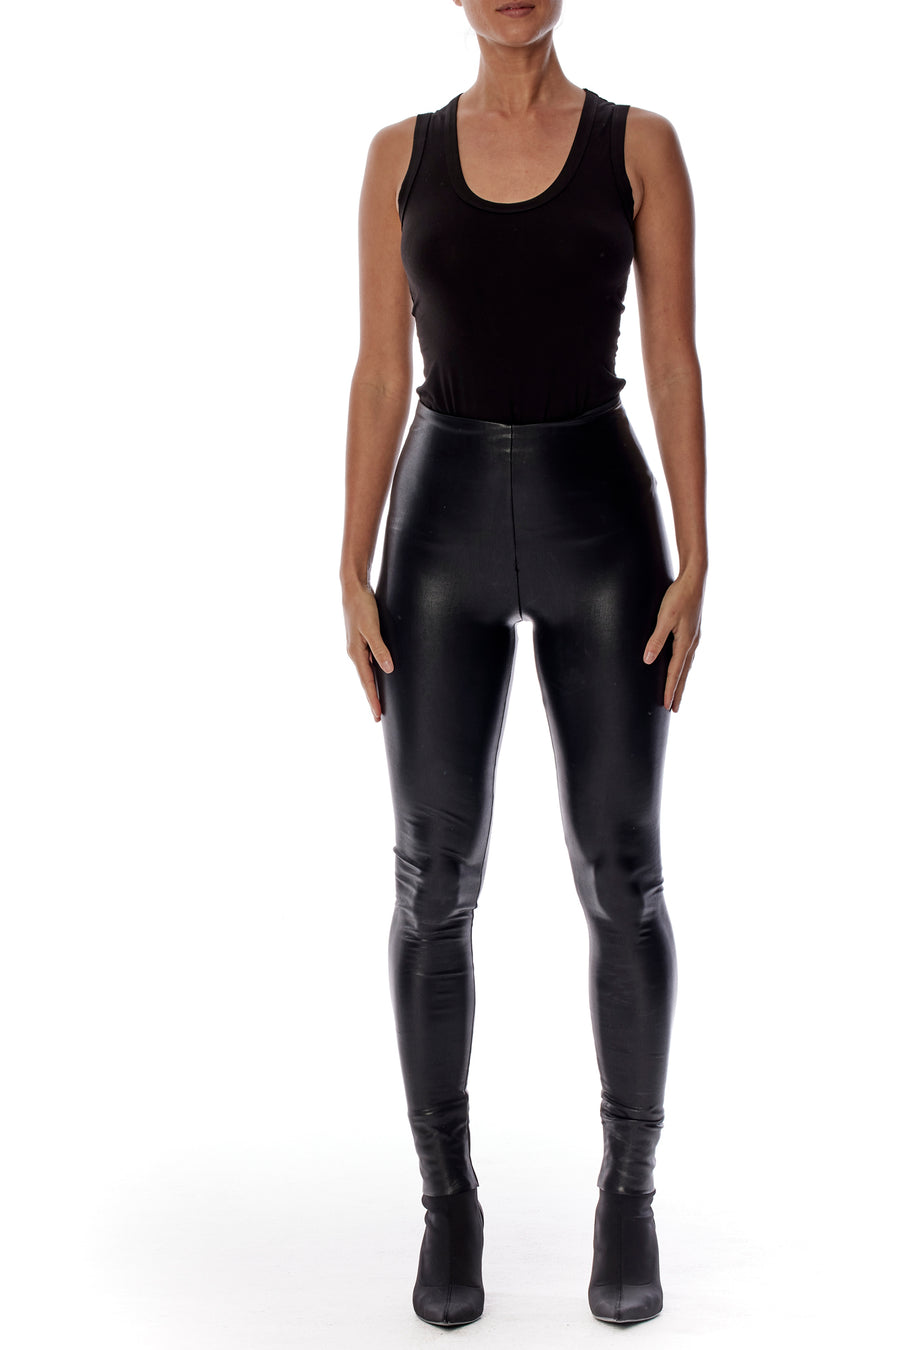 vegan leather legging with a medium rise and flattering fit in black